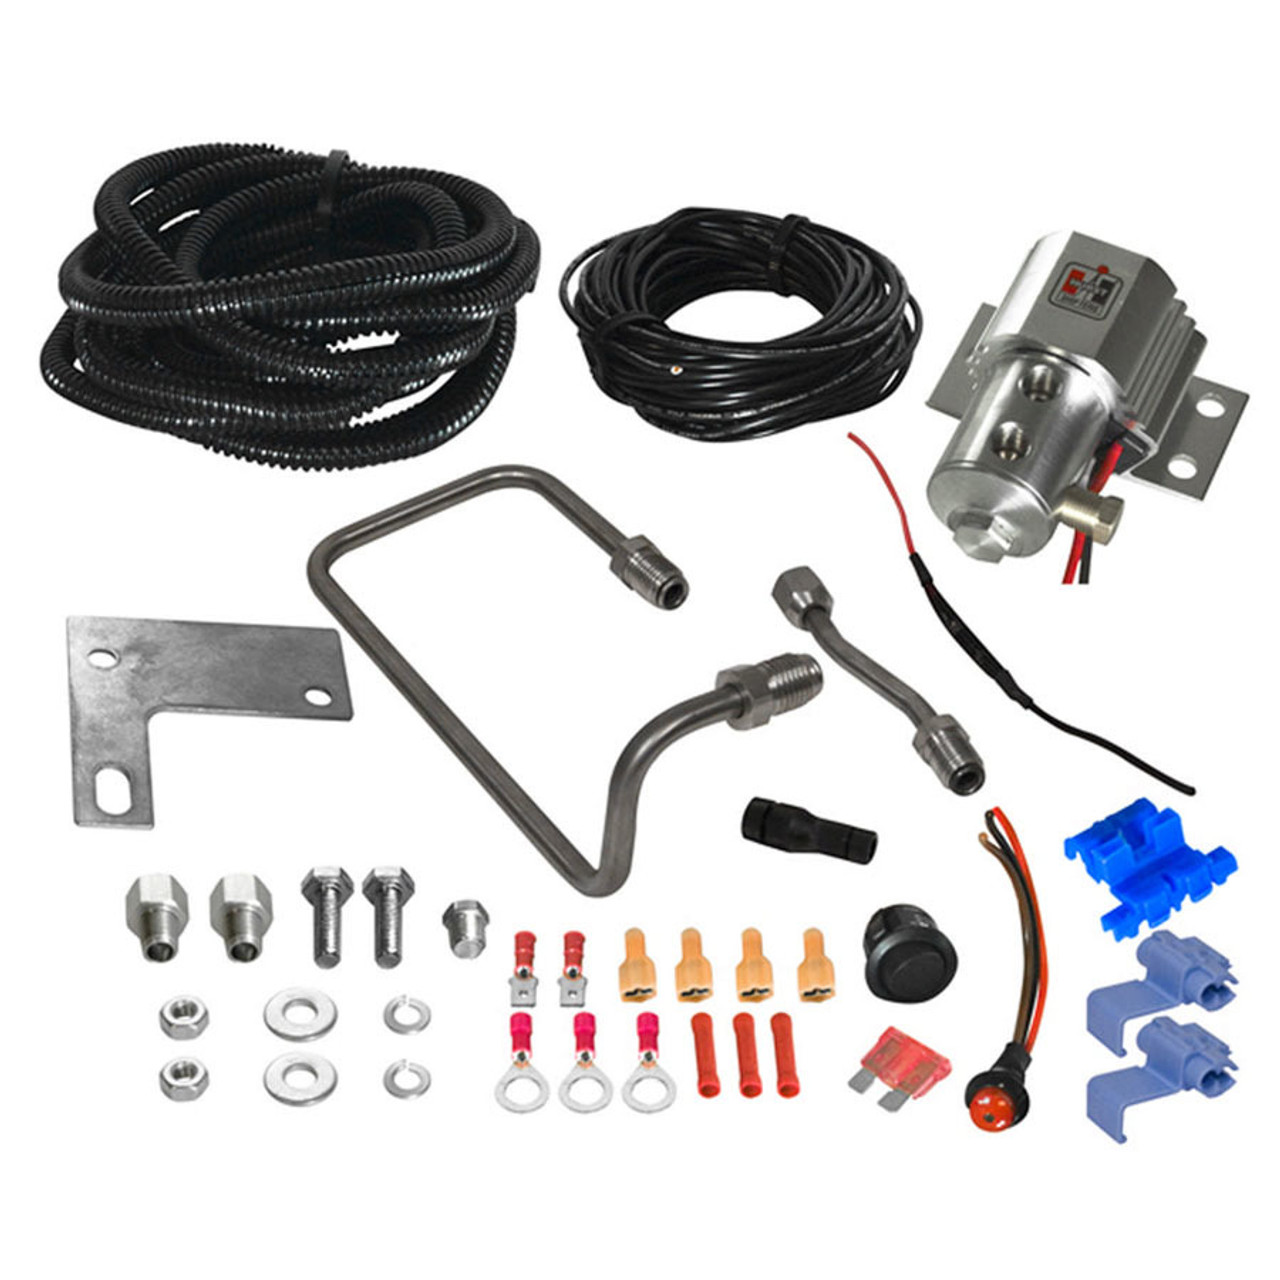 Roll Control Kit 2010-up Mustang